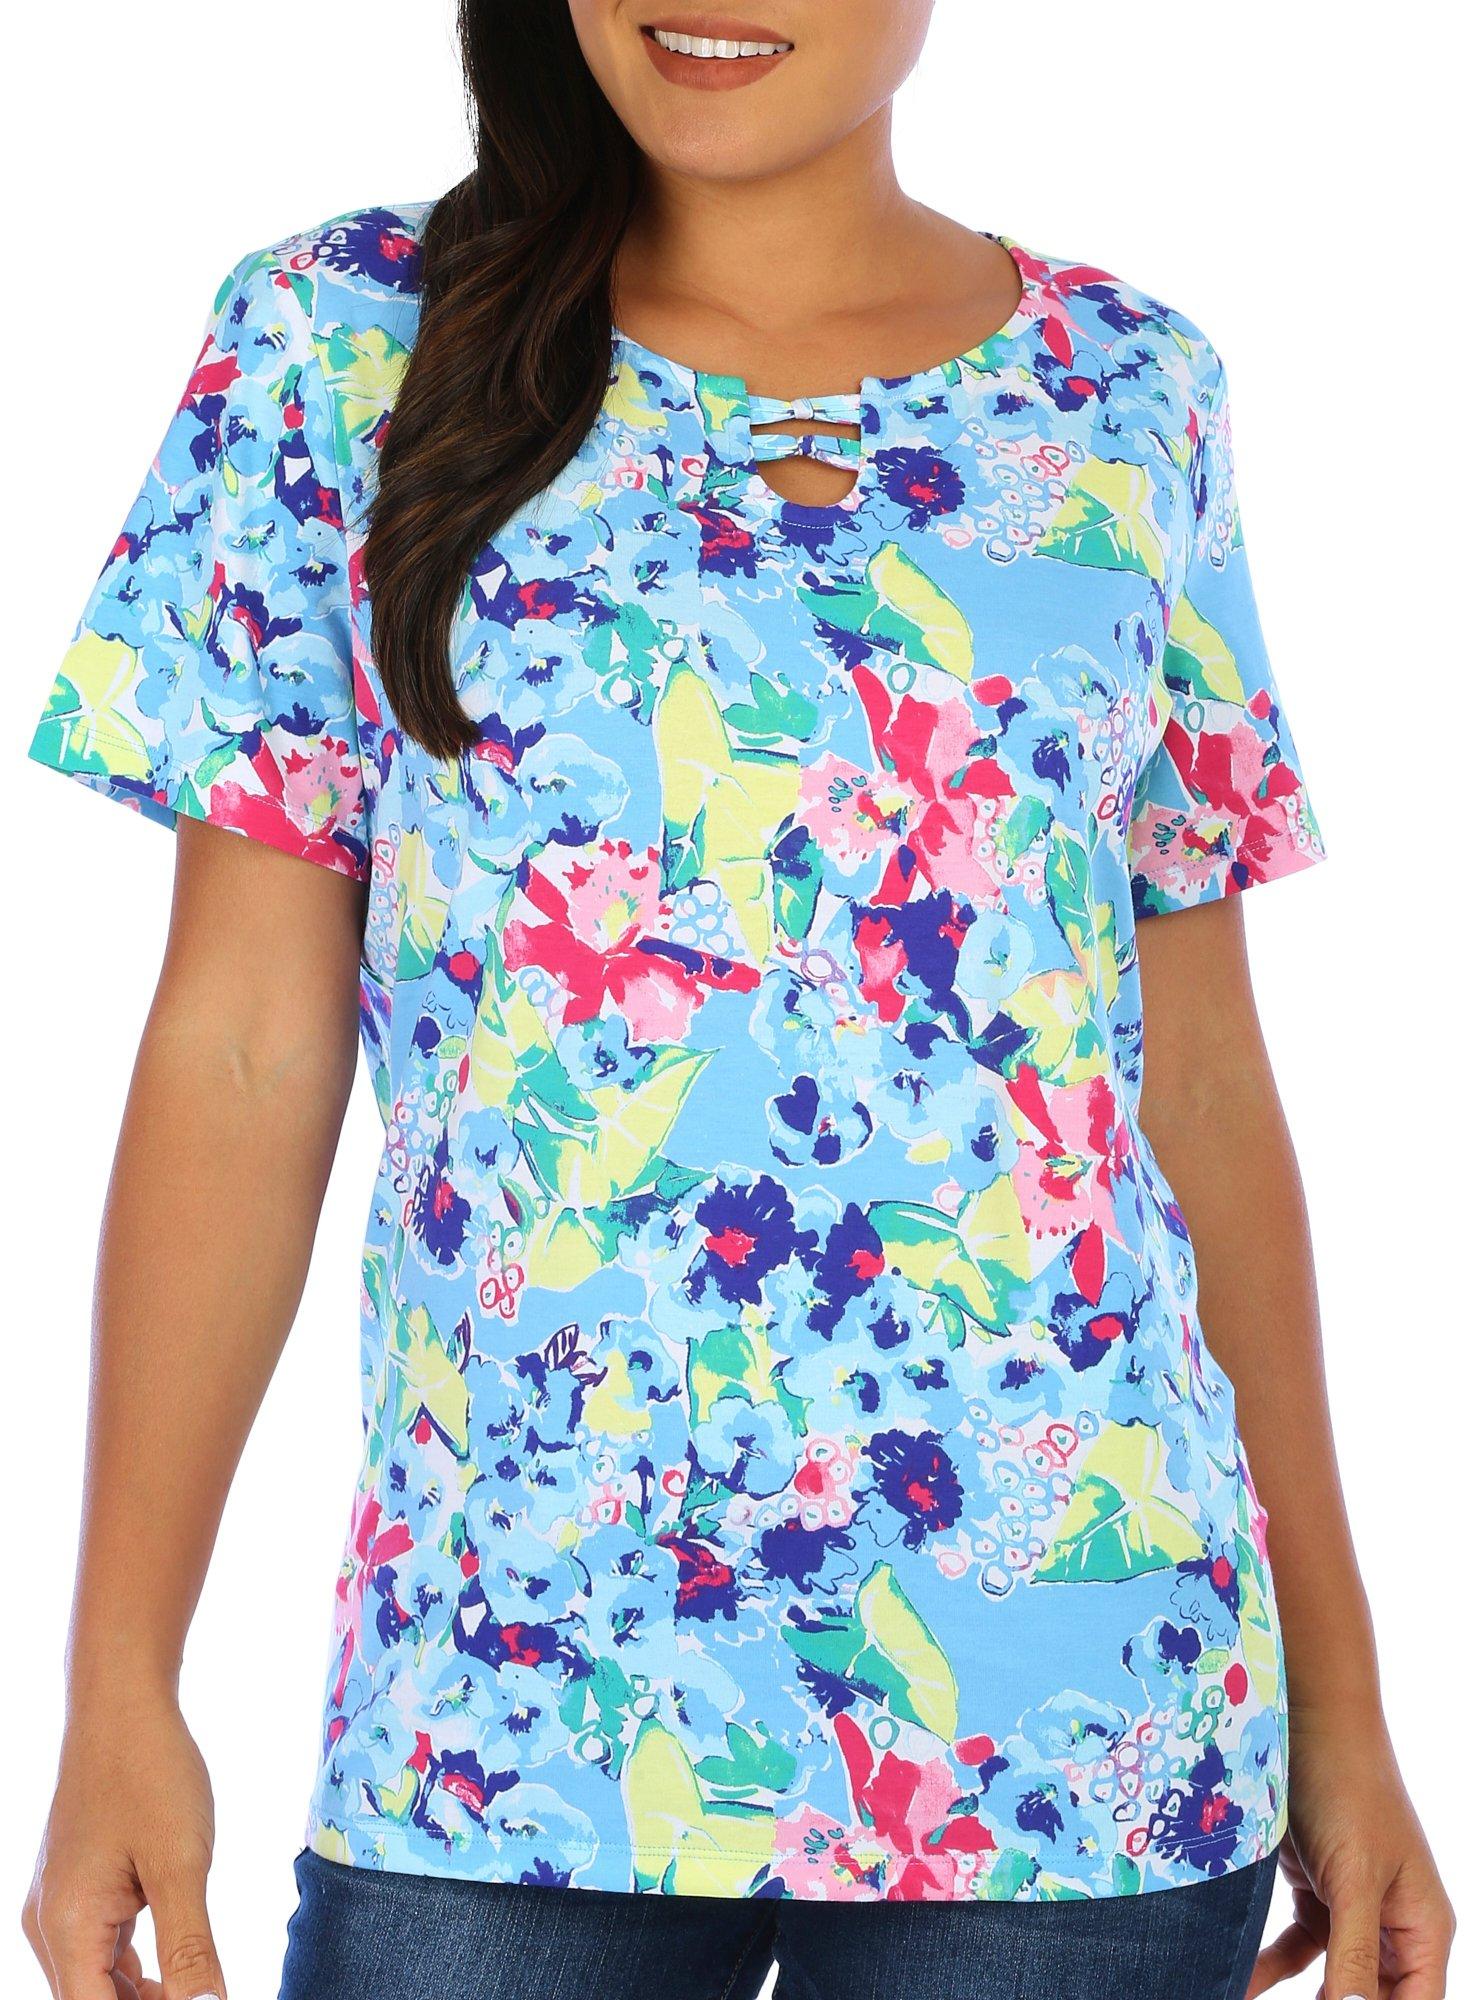 Coral Bay Womens Floral Keyhole Short Sleeve Top